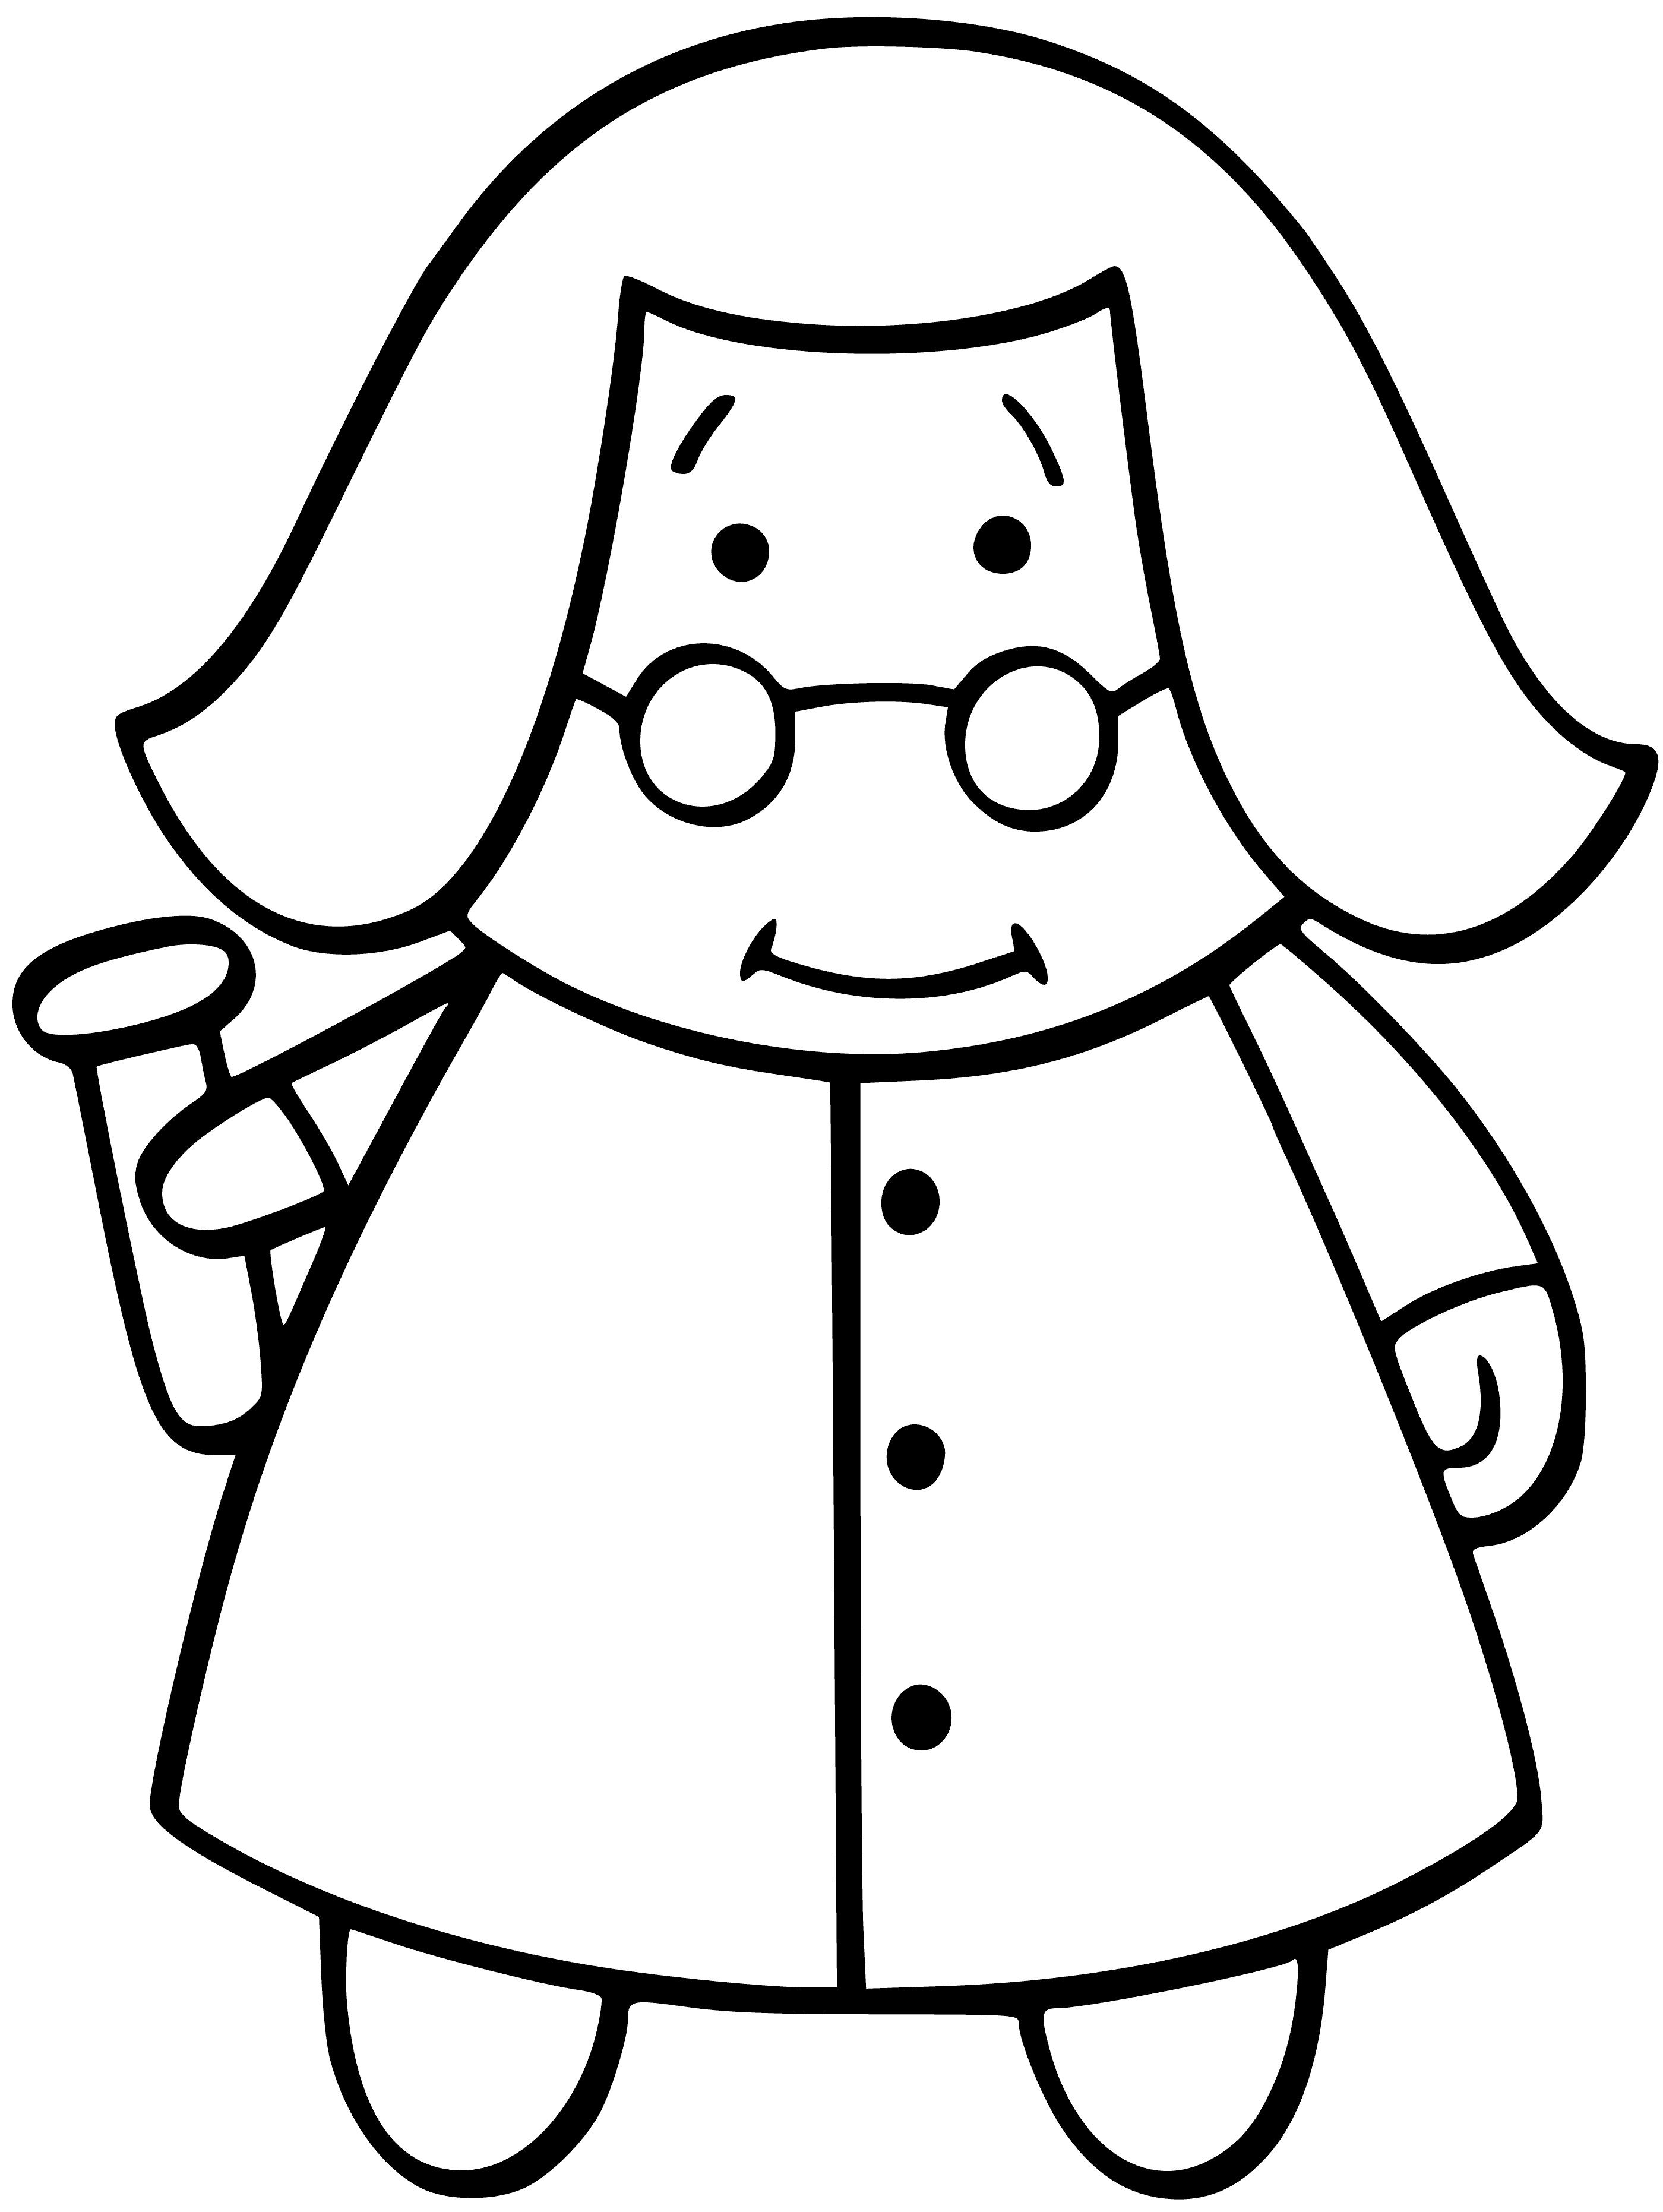 coloring page: Person works in lab with beakers, test tubes and microscope; smoking beakers; wearing gloves and mask for protection.